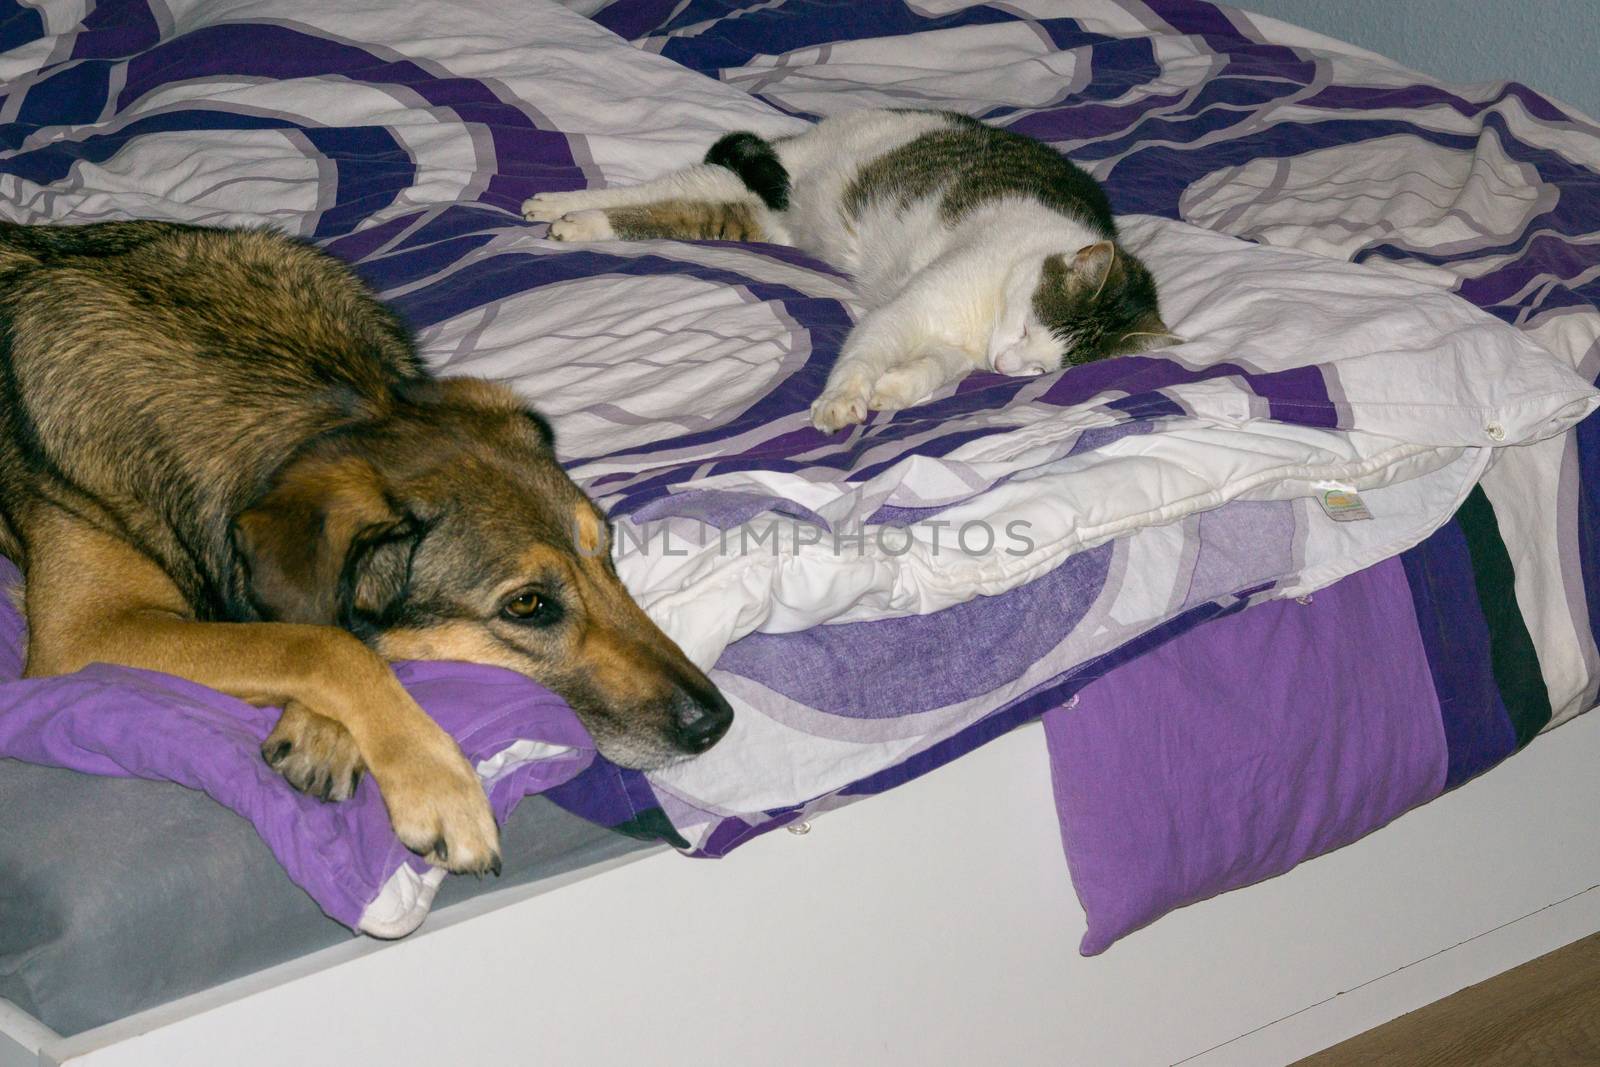 cat and dog are slepping in the bed together